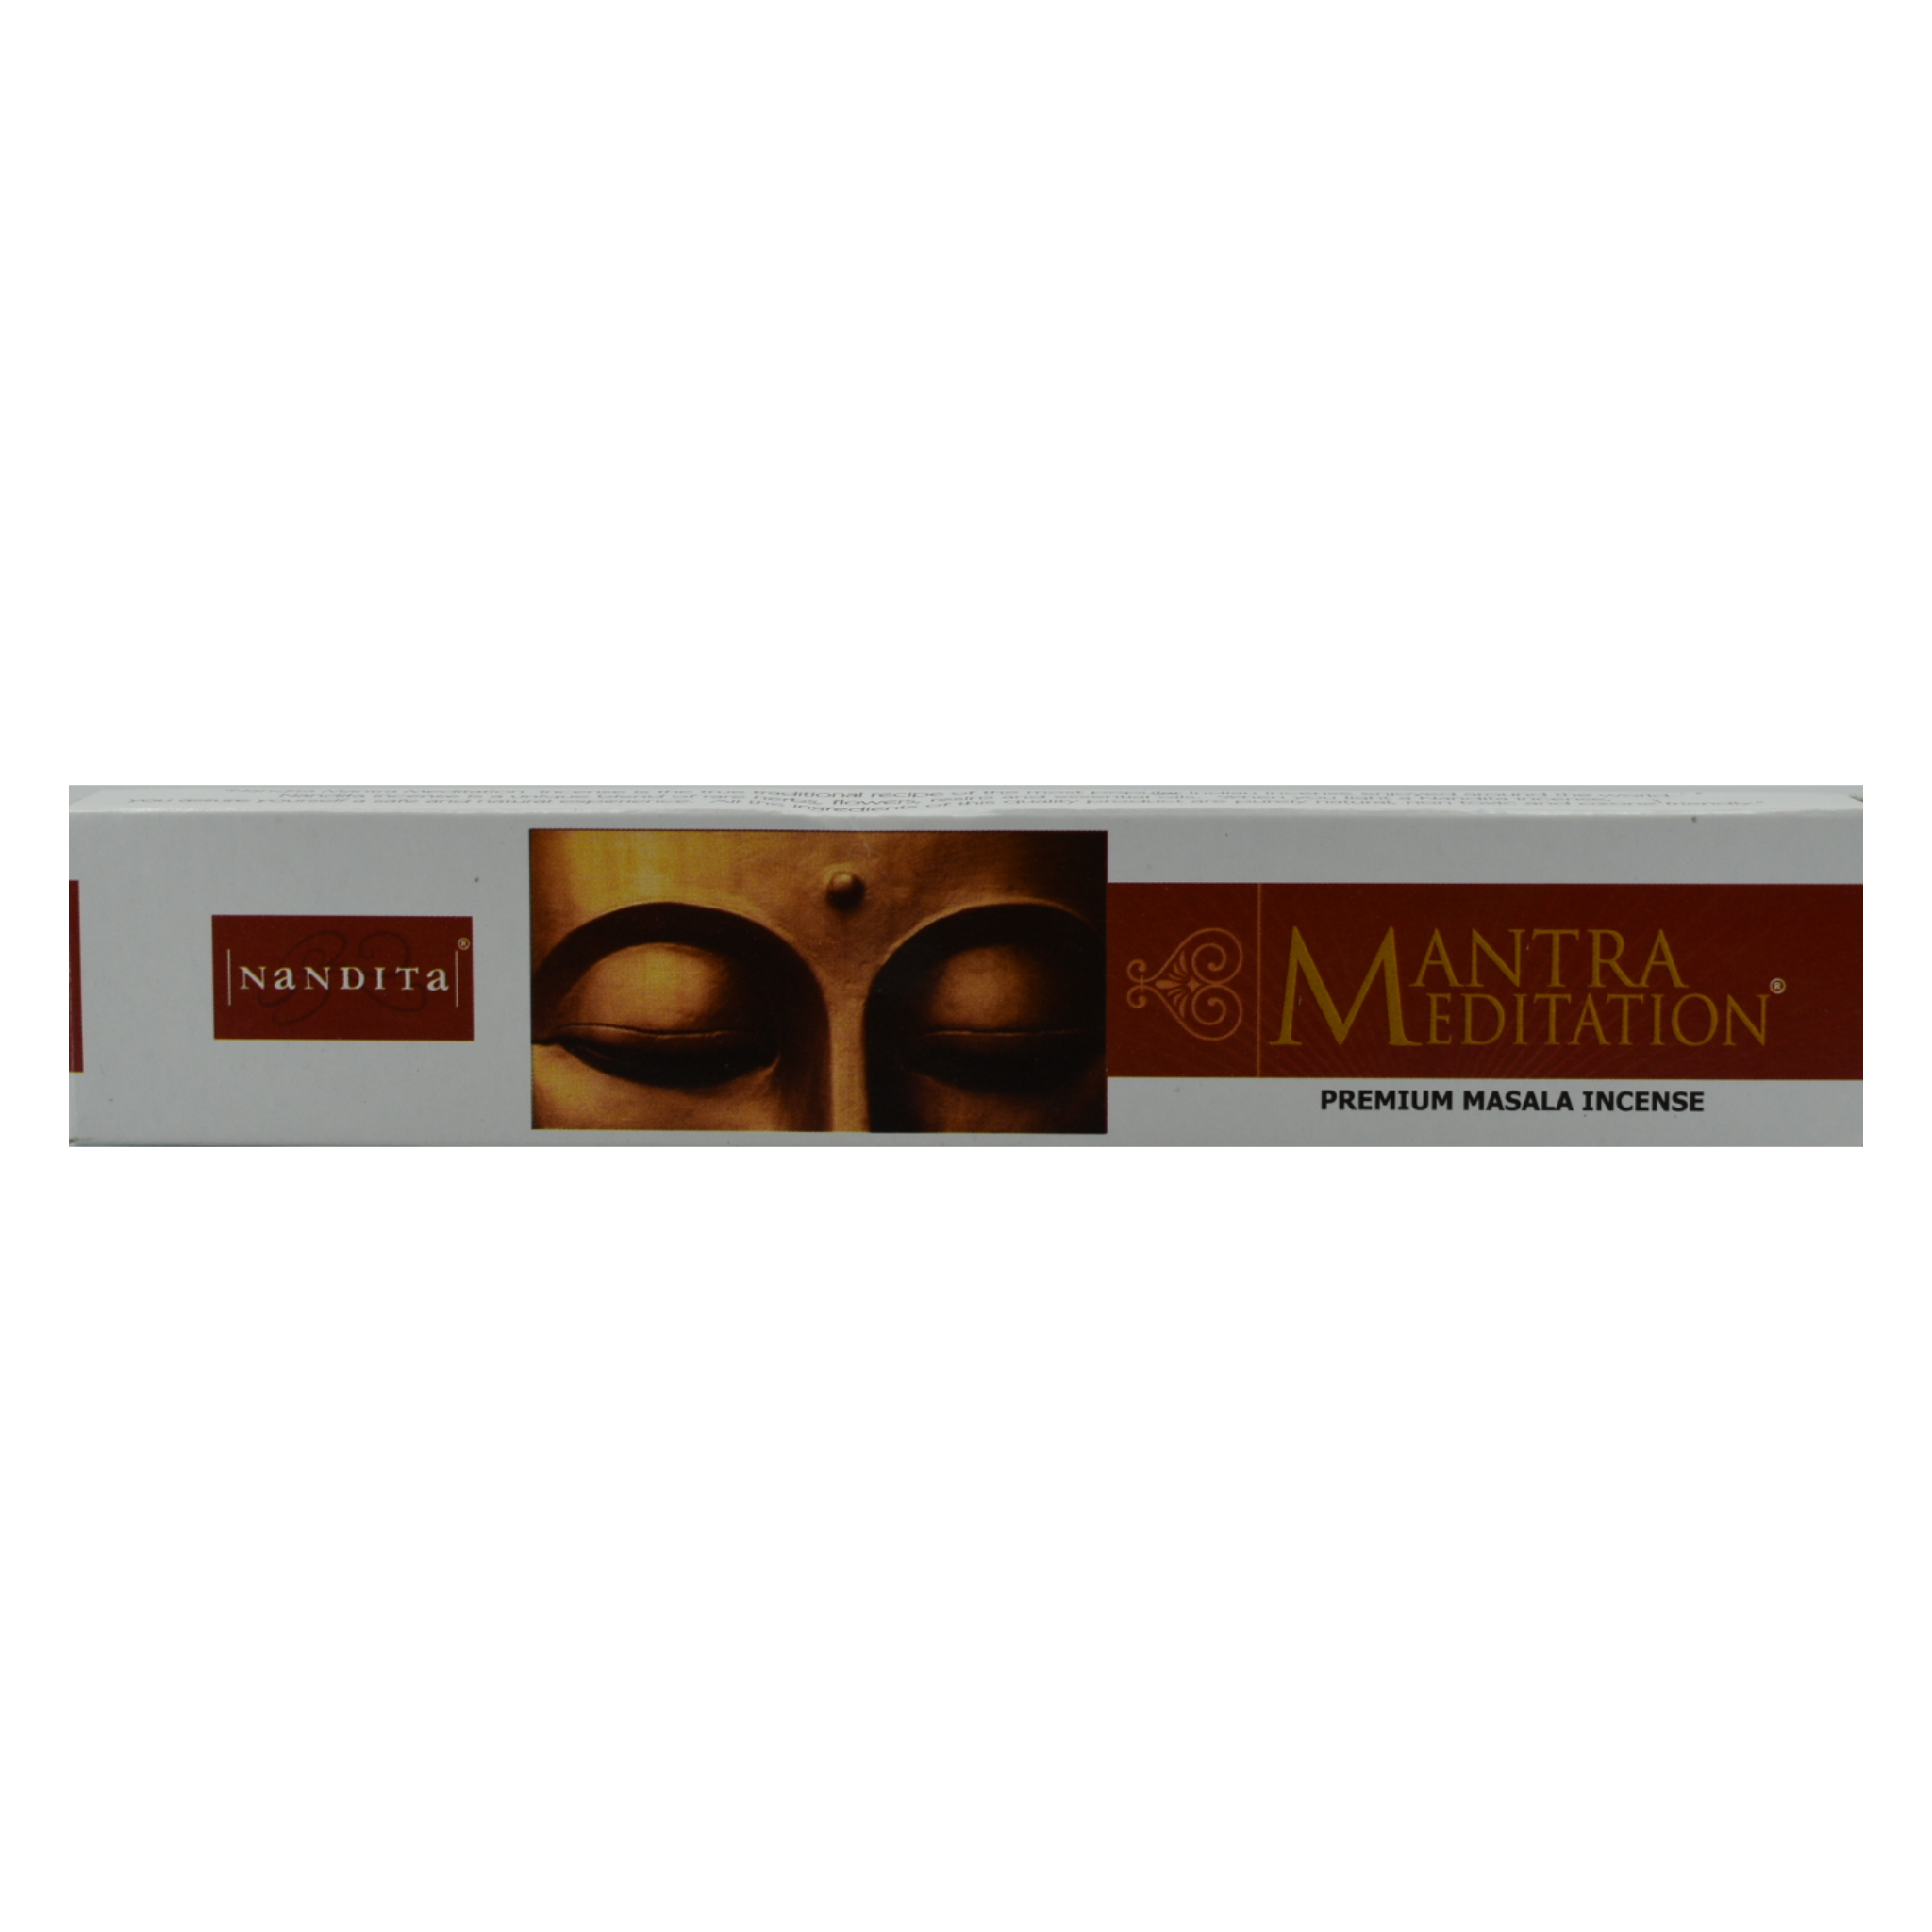 Mantra Meditation Incense Sticks. The box is white background with brown boxes. The small rectangle on the right has the company name Nandita. The center larger rectangle has a picture of a women's eyes and forehead with a bindi. The right rectangle has the title Mantra Meditation and below it in white it says Premium Masala Incense.